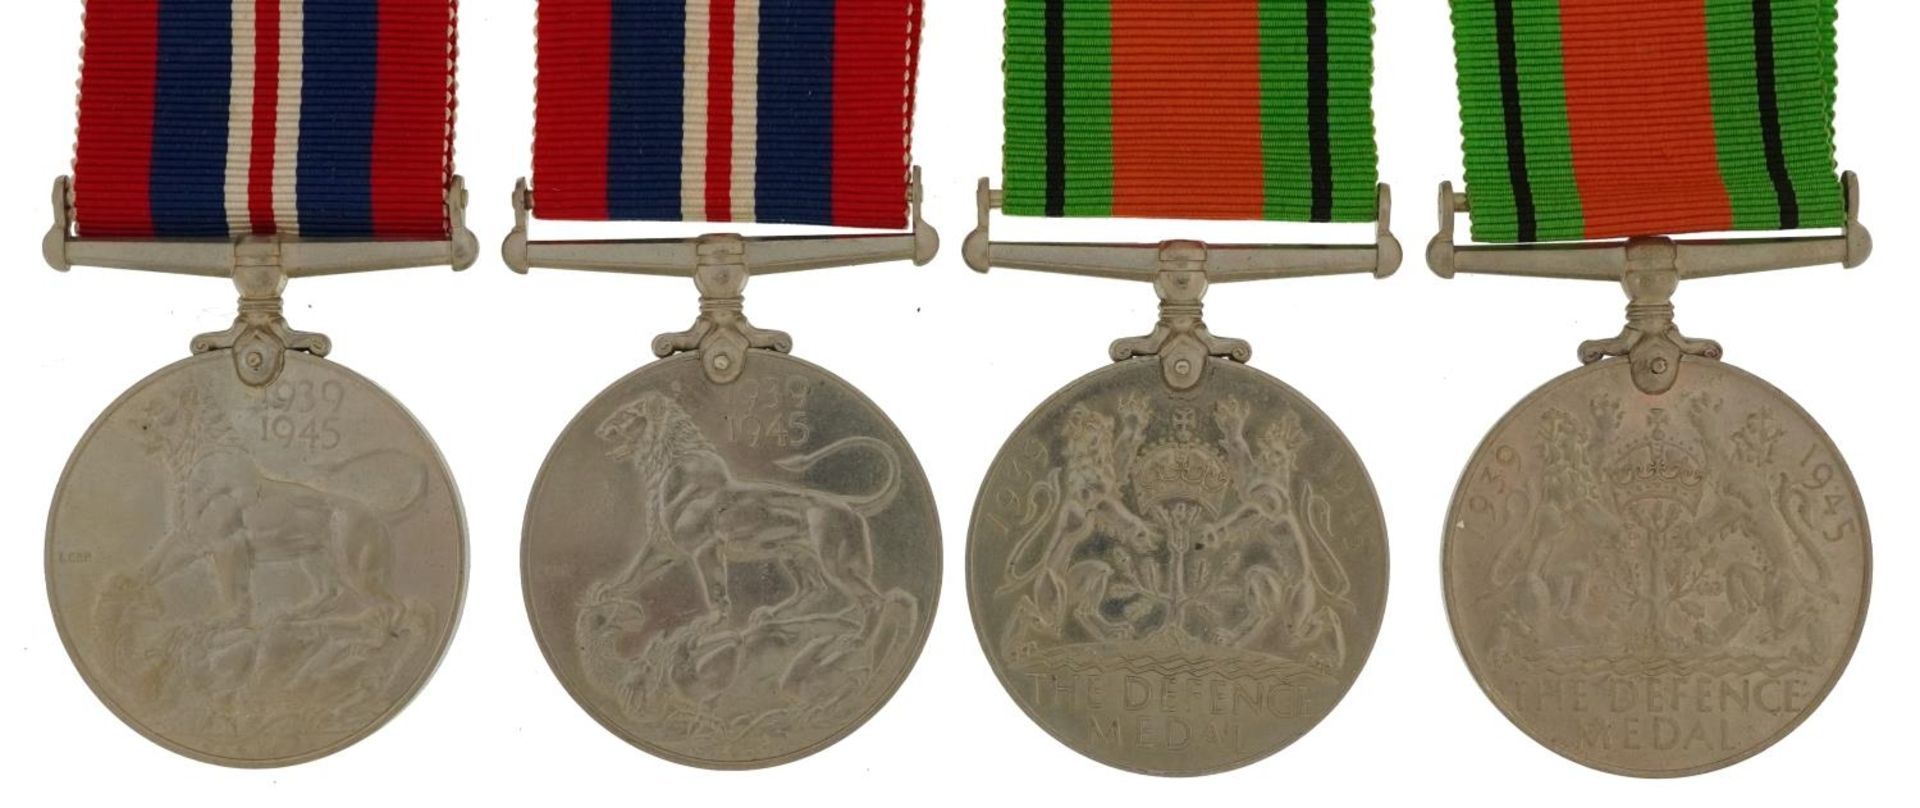 Four British military World War II medals with two boxes of issue : For further information on - Bild 3 aus 3